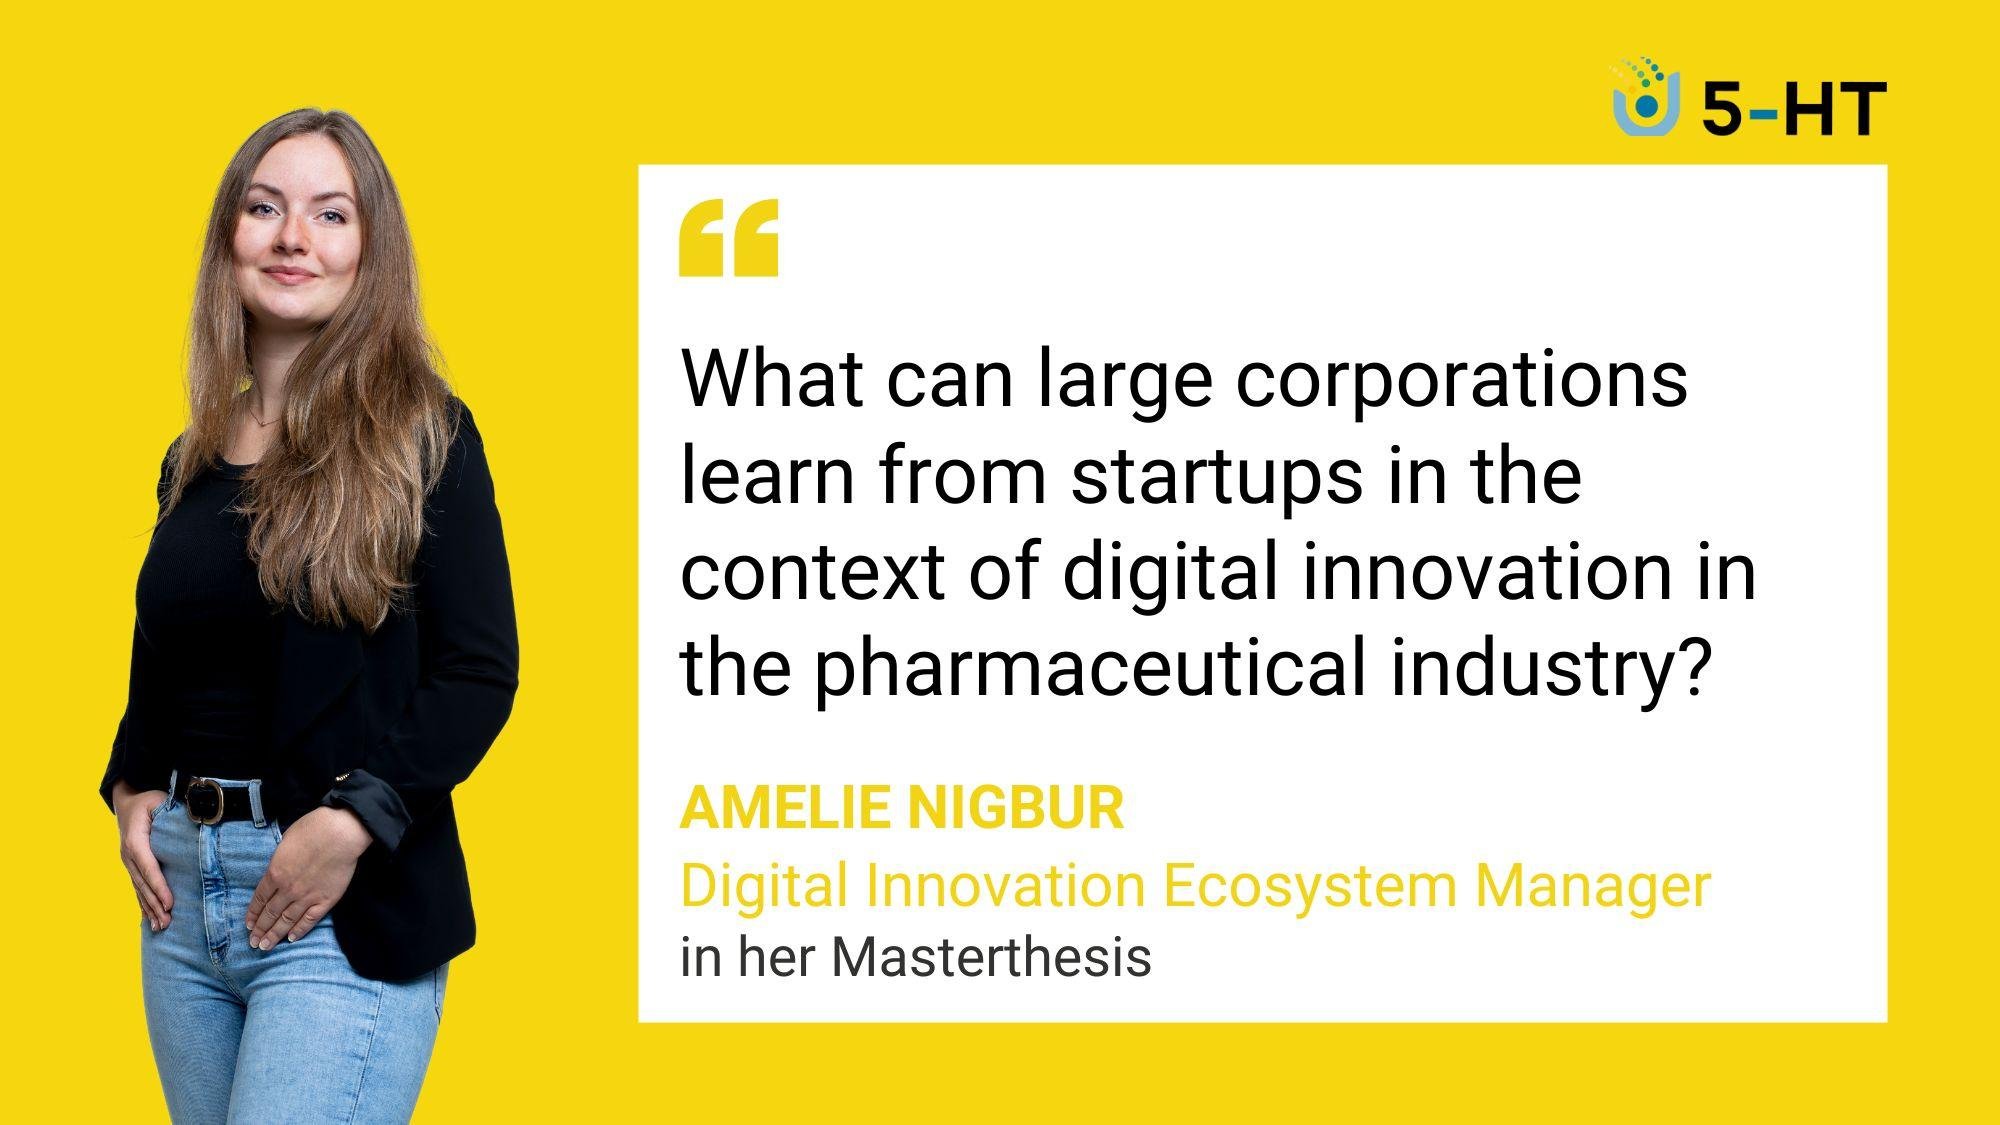 What can large corporations learn from startups in the context of digital innovation in the pharmaceutical industry?